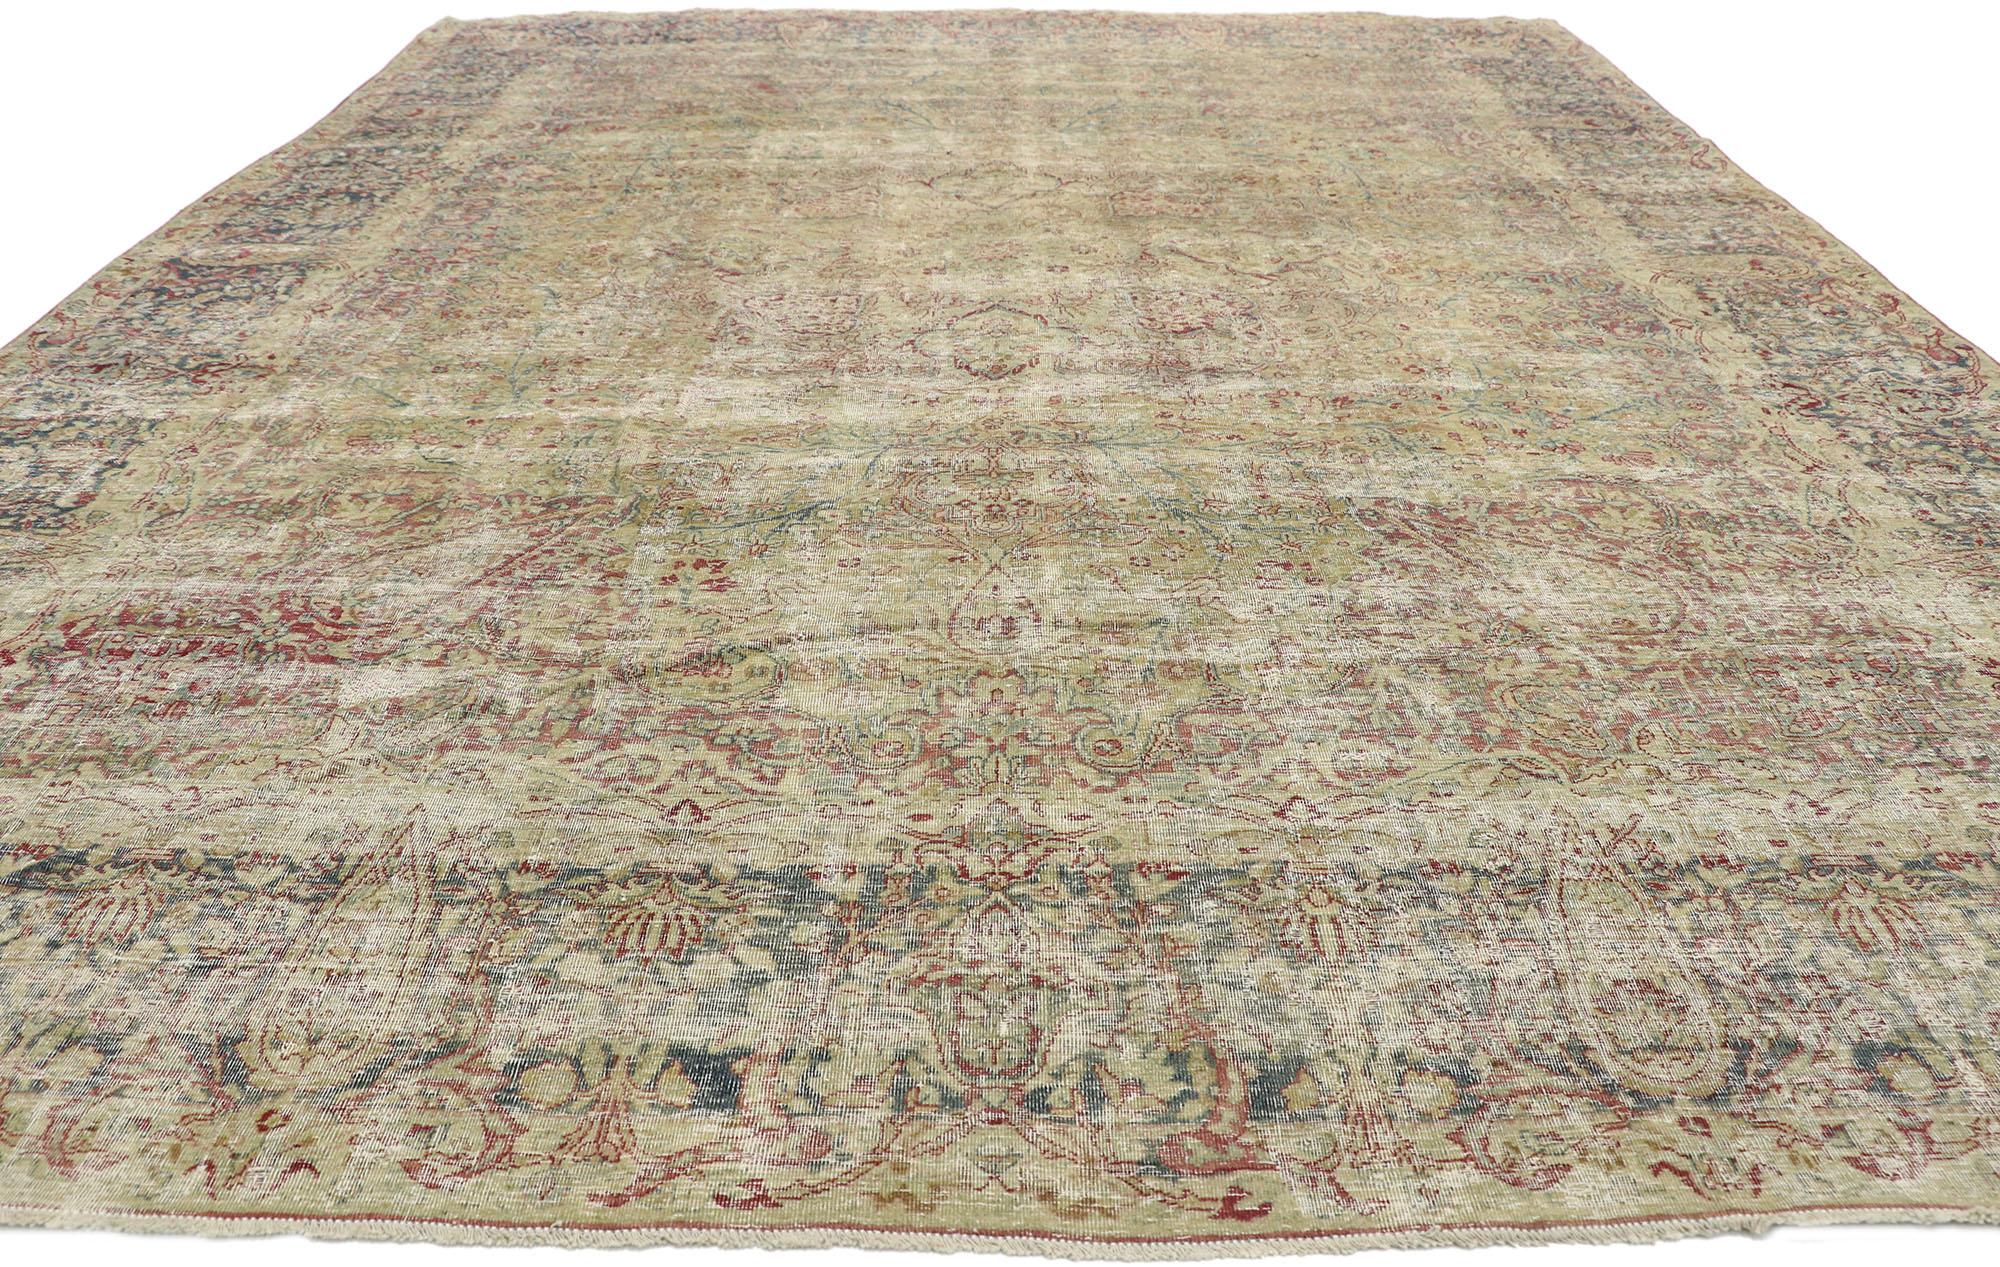 Kirman Distressed Antique Persian Kerman Rug with Modern Rustic English Cottage Style For Sale